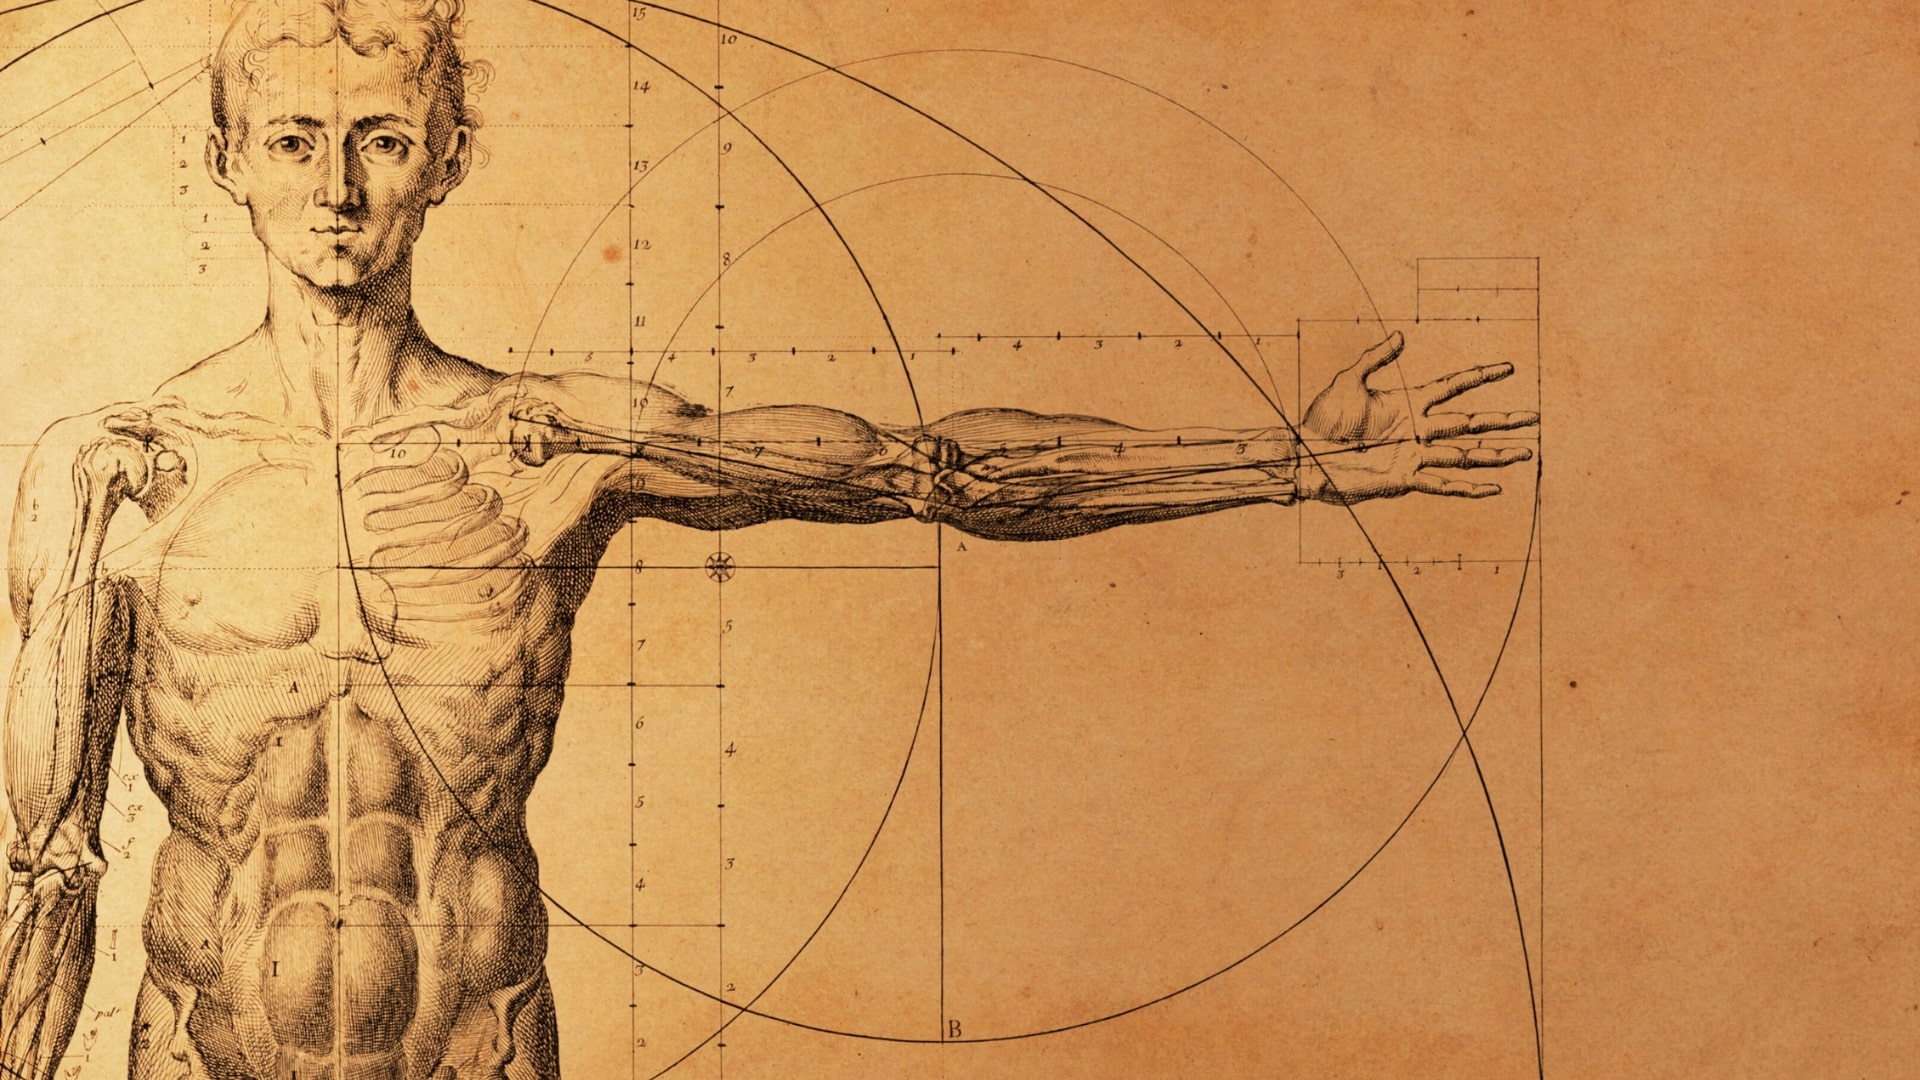 Vintage anatomy illustration of man holding arm out, indicating body systems including the endocannabinoid system.